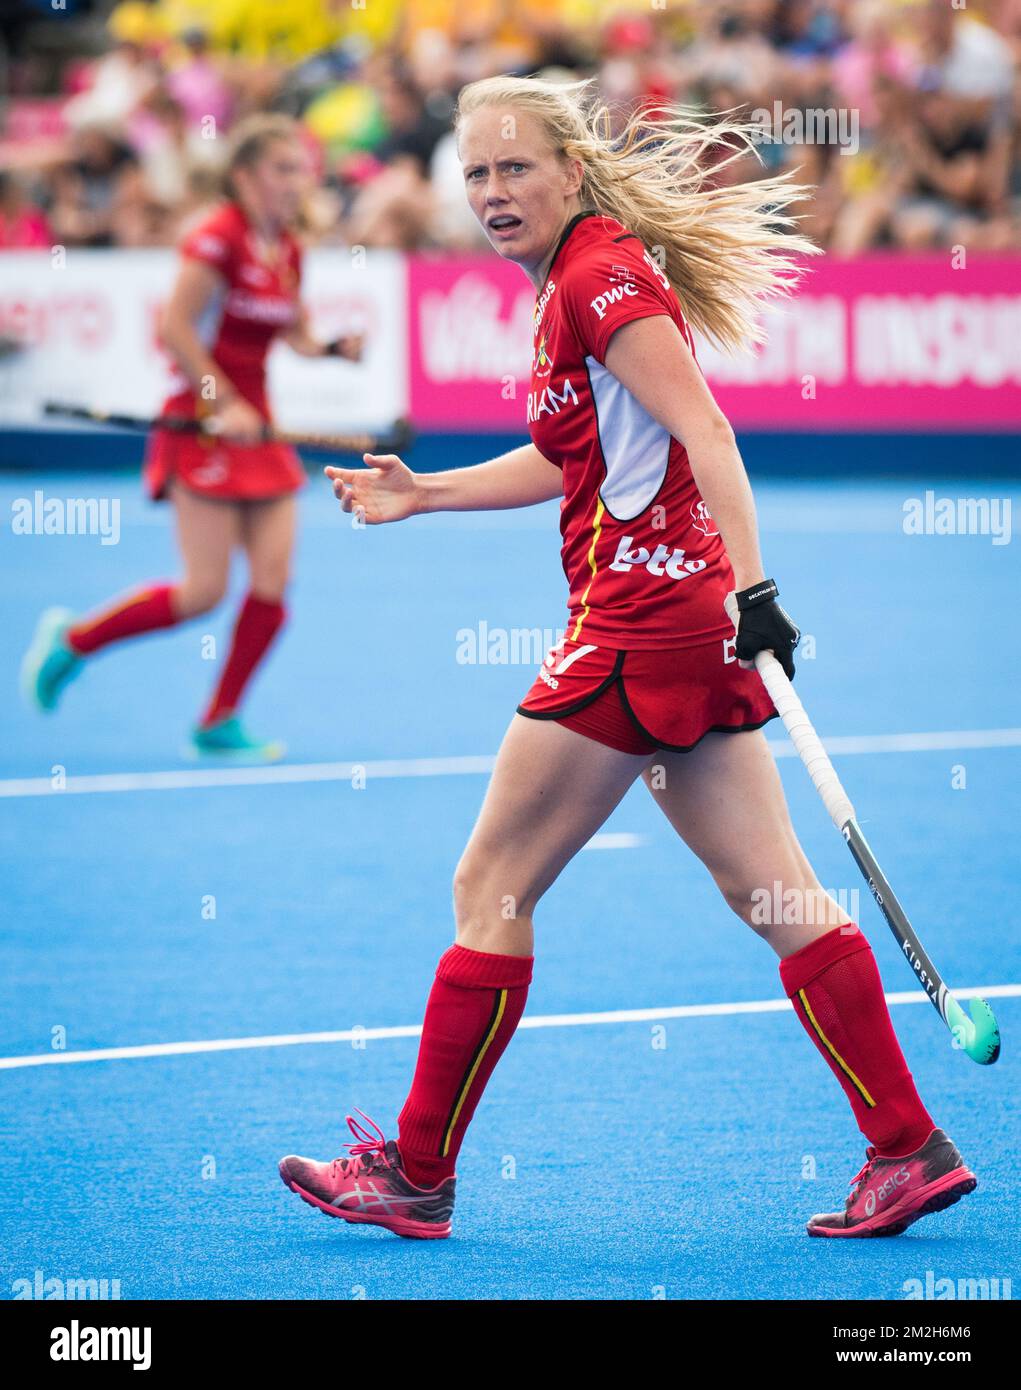 Belgium's Jill Boon reacts during the game between Australia and Belgium in group D at the Hockey Women's World Cup, in London, UK, Tuesday 24 July 2018. The Hockey Women's World Cup takes place from 21 July to 05 August at the Lee Valley Hockey Centre in London. BELGA PHOTO BENOIT DOPPAGNE  Stock Photo